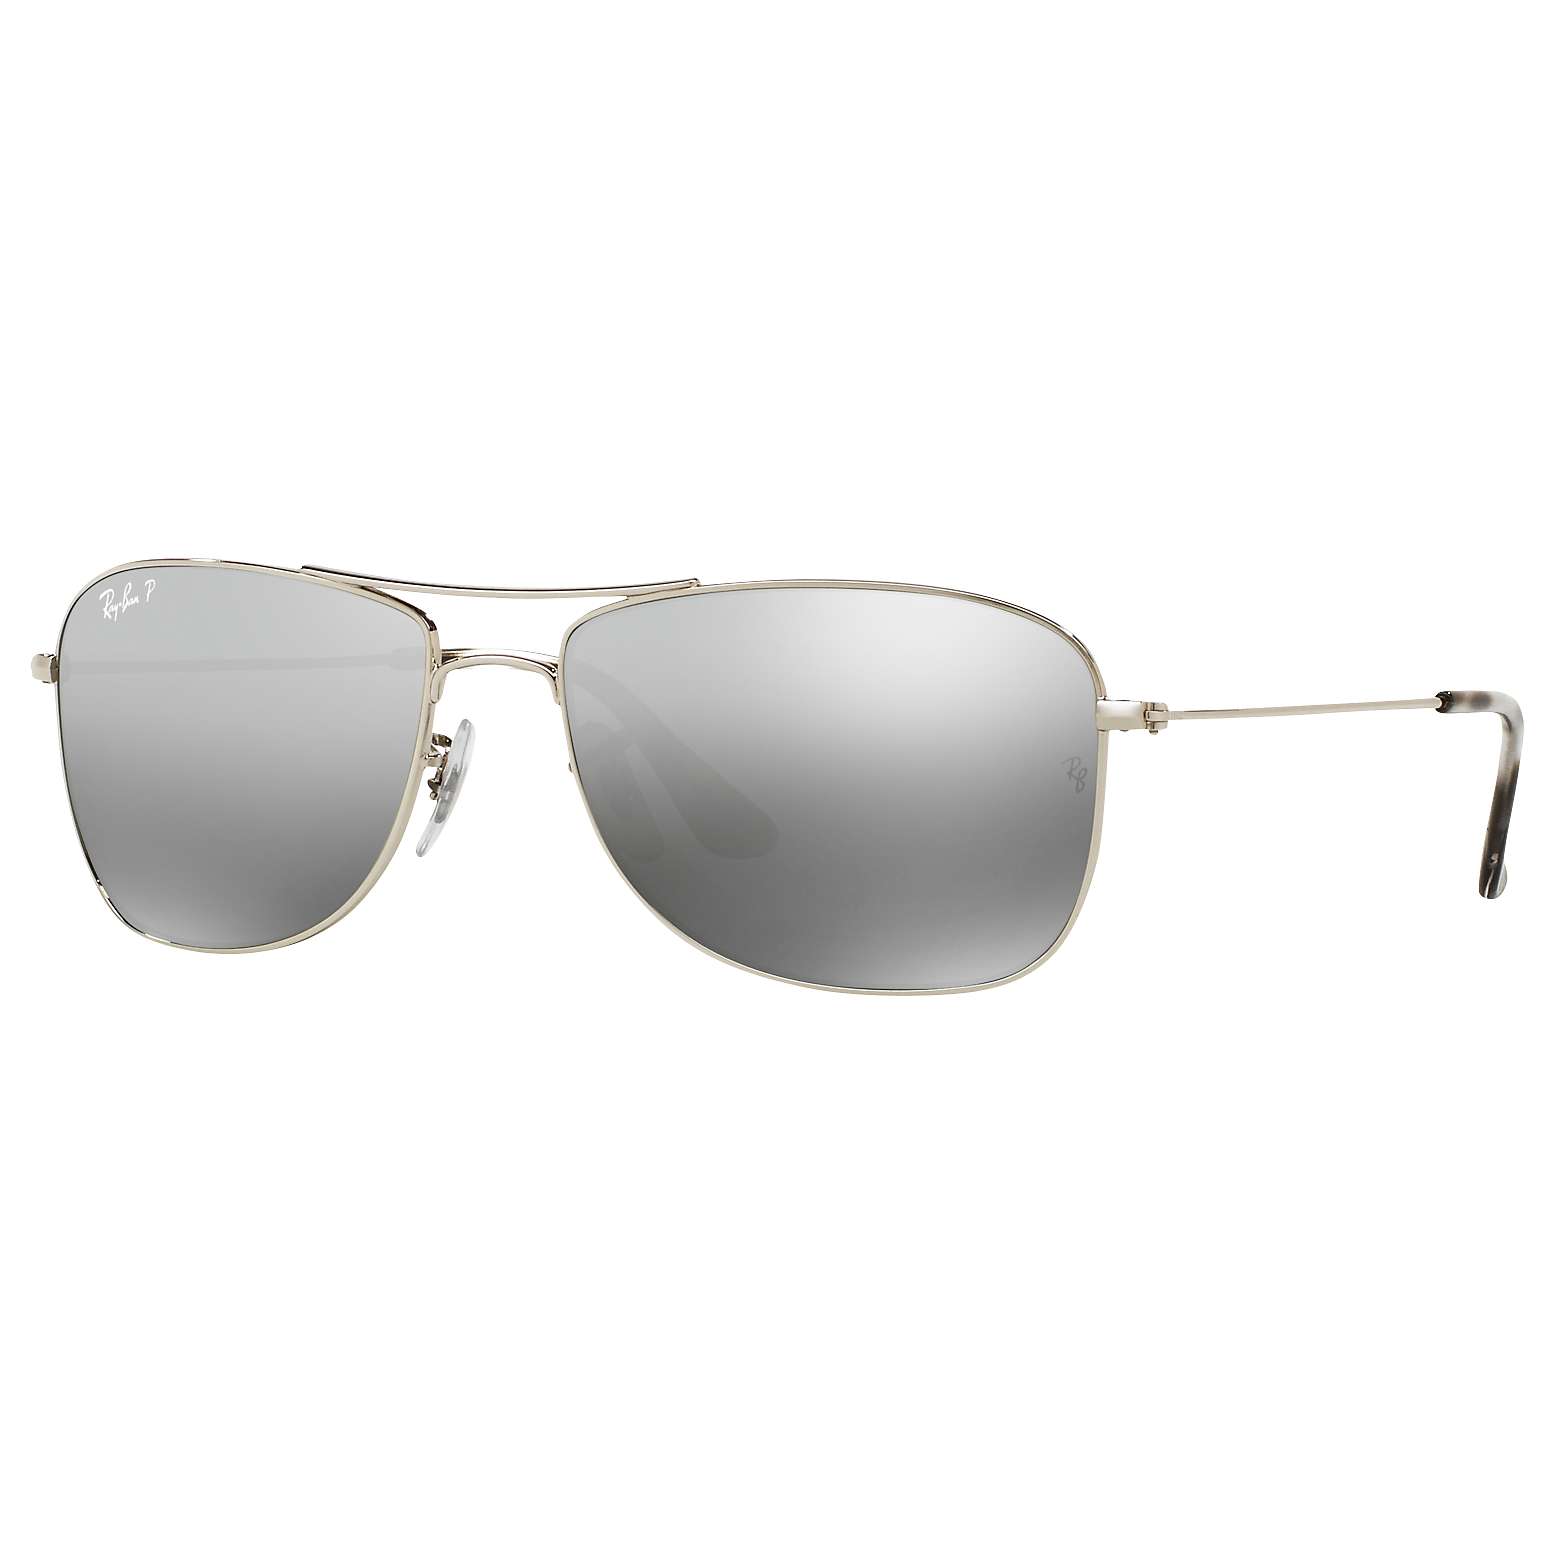 White Ray-Ban Sunglasses in Silver Womens Sunglasses Ray-Ban Sunglasses 